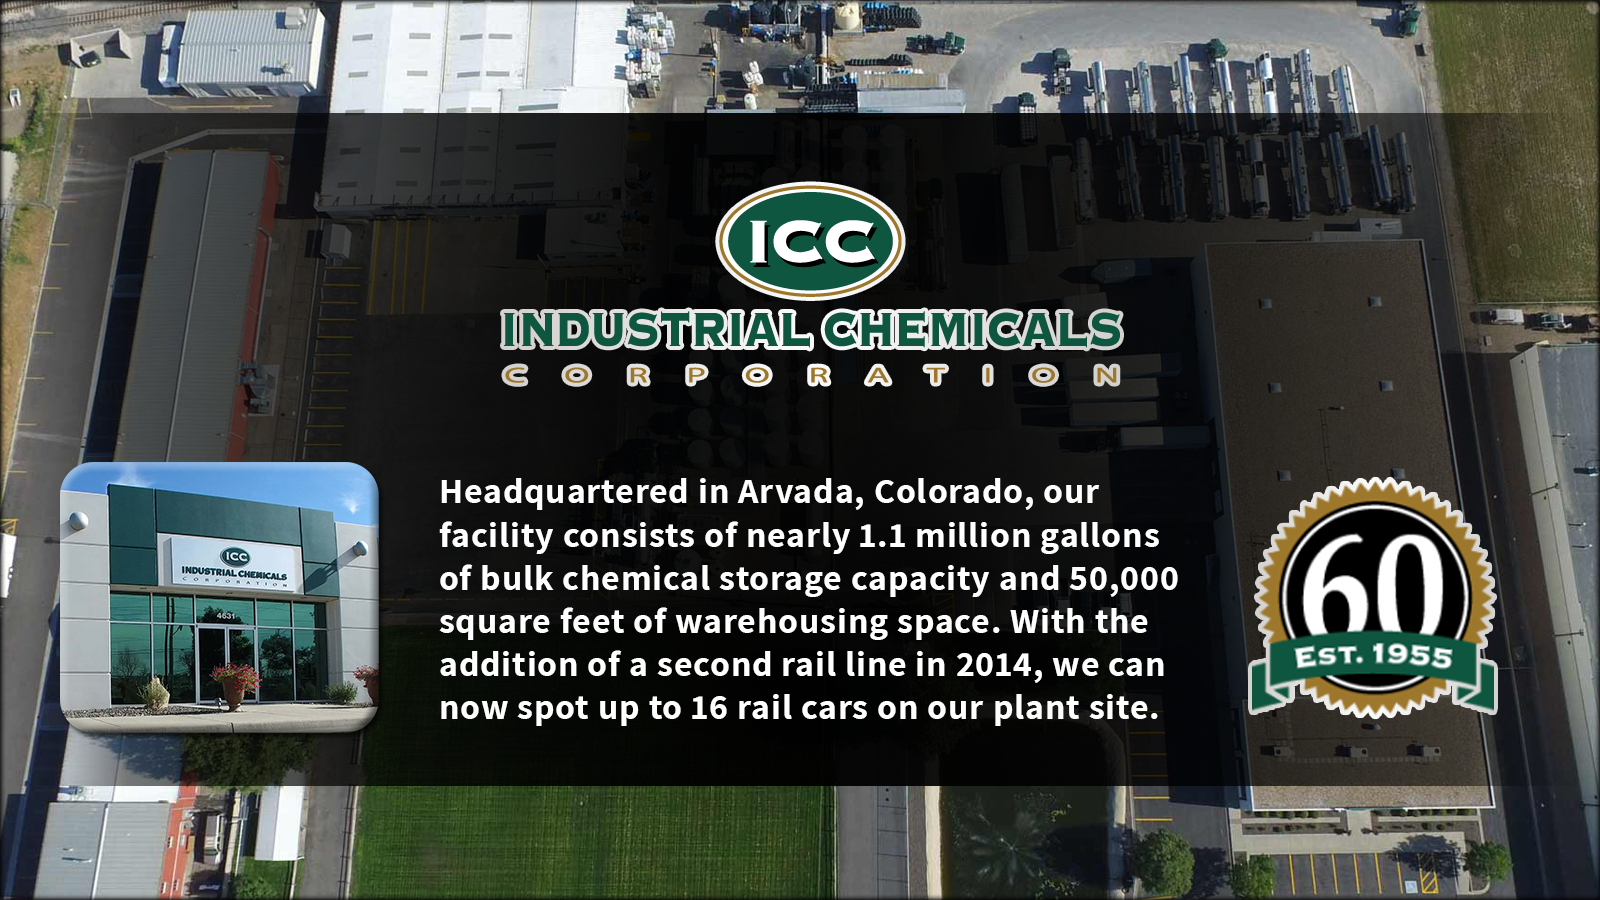 Headquartered in Arvada, Colorado, our facility consists of nearly 1.1 million gallons of bulk chemical storage capacity and 50,000 square feet of warehousing space. With the addition of a second rail line in 2014, we can now spot up to 16 rail cars on our plant site.